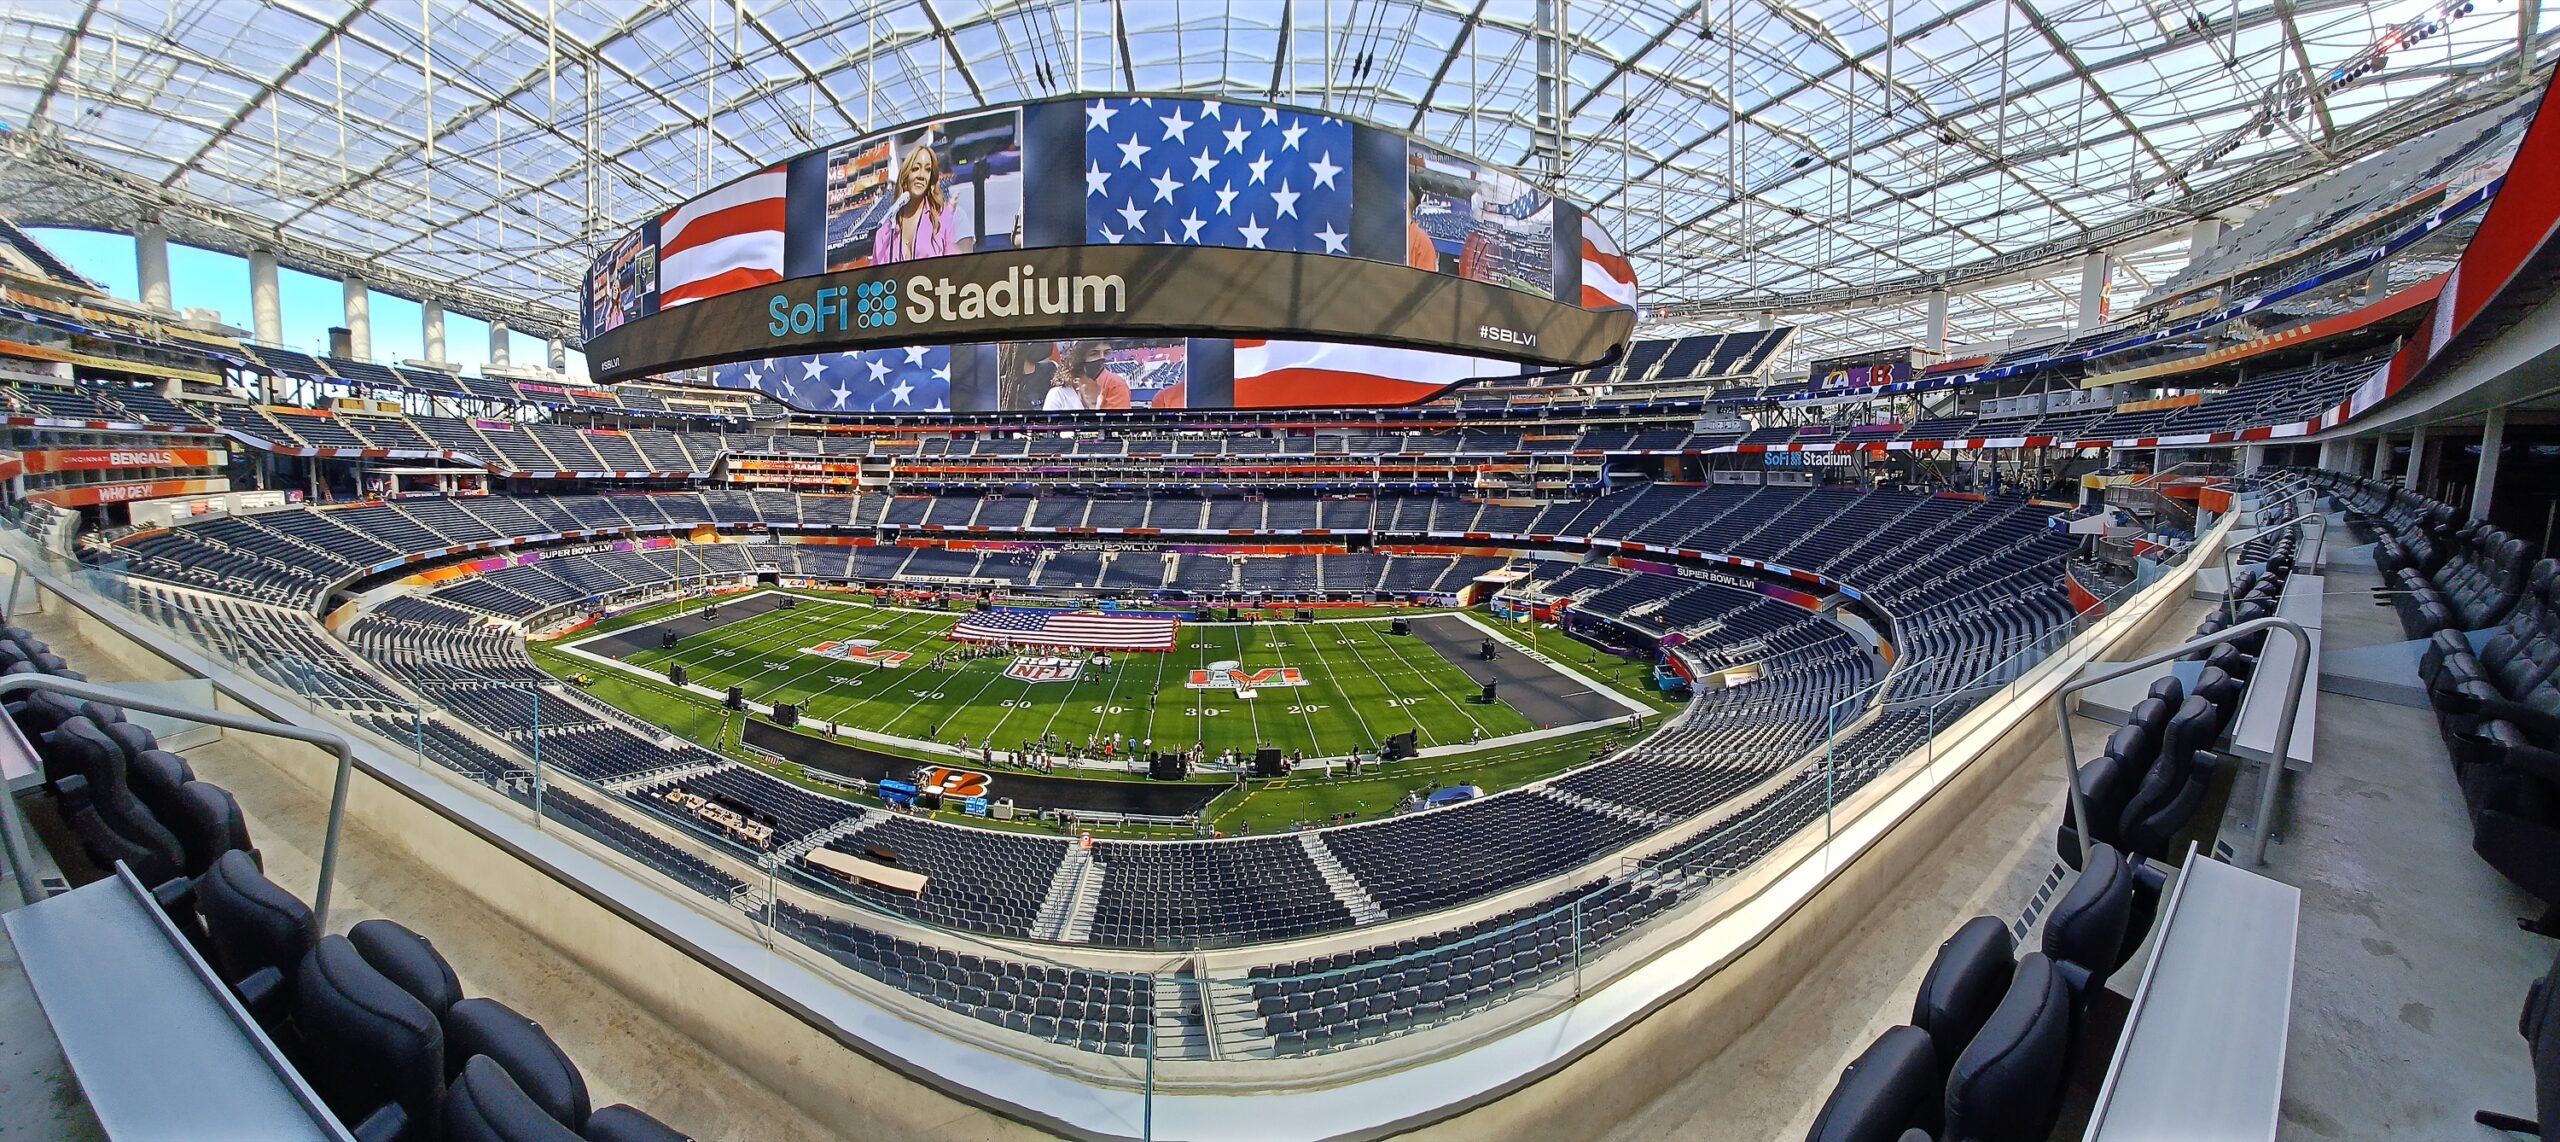 Most Expensive NFL Stadiums Ranking The Stadiums by The Cost The